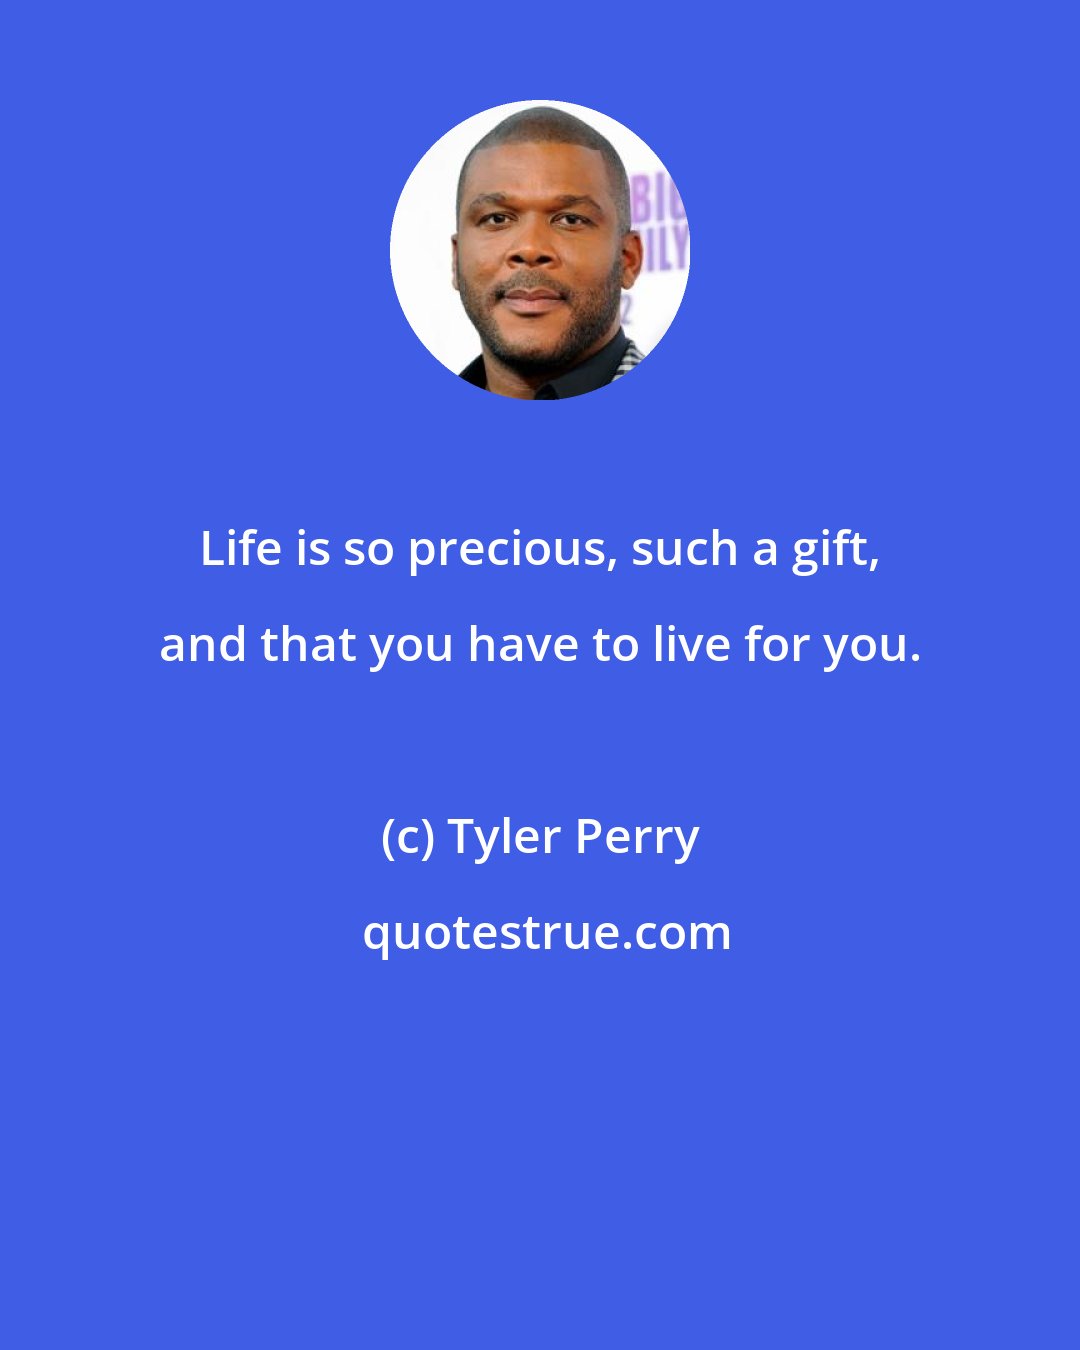 Tyler Perry: Life is so precious, such a gift, and that you have to live for you.